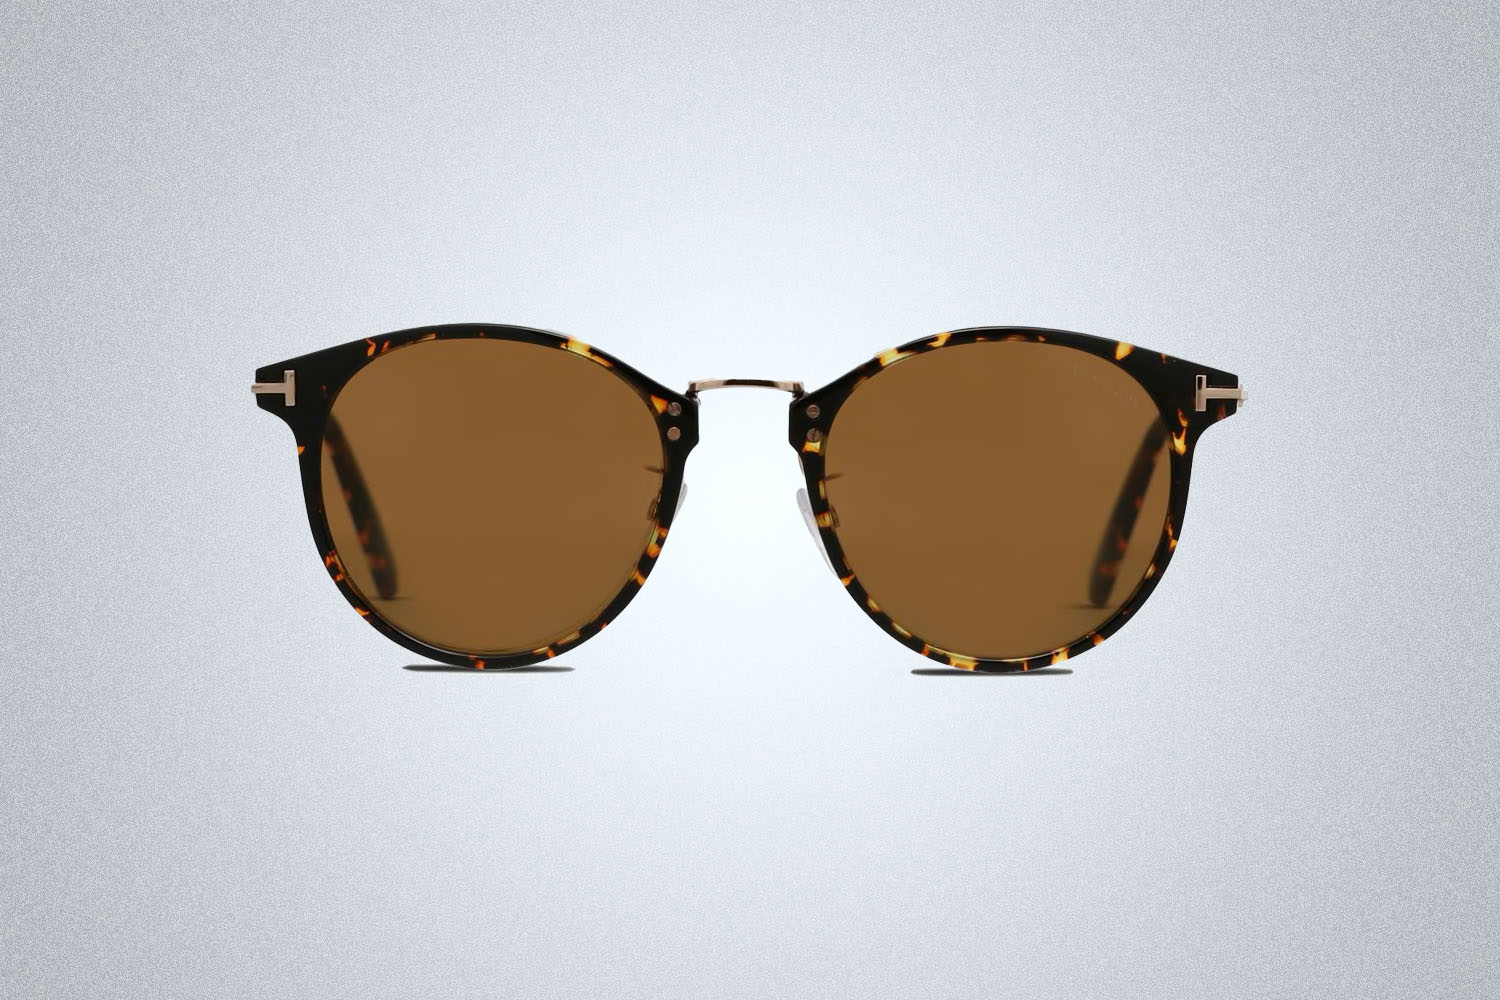 a pair of circular, tortoise-shell Tom Ford sunglasses on a grey background